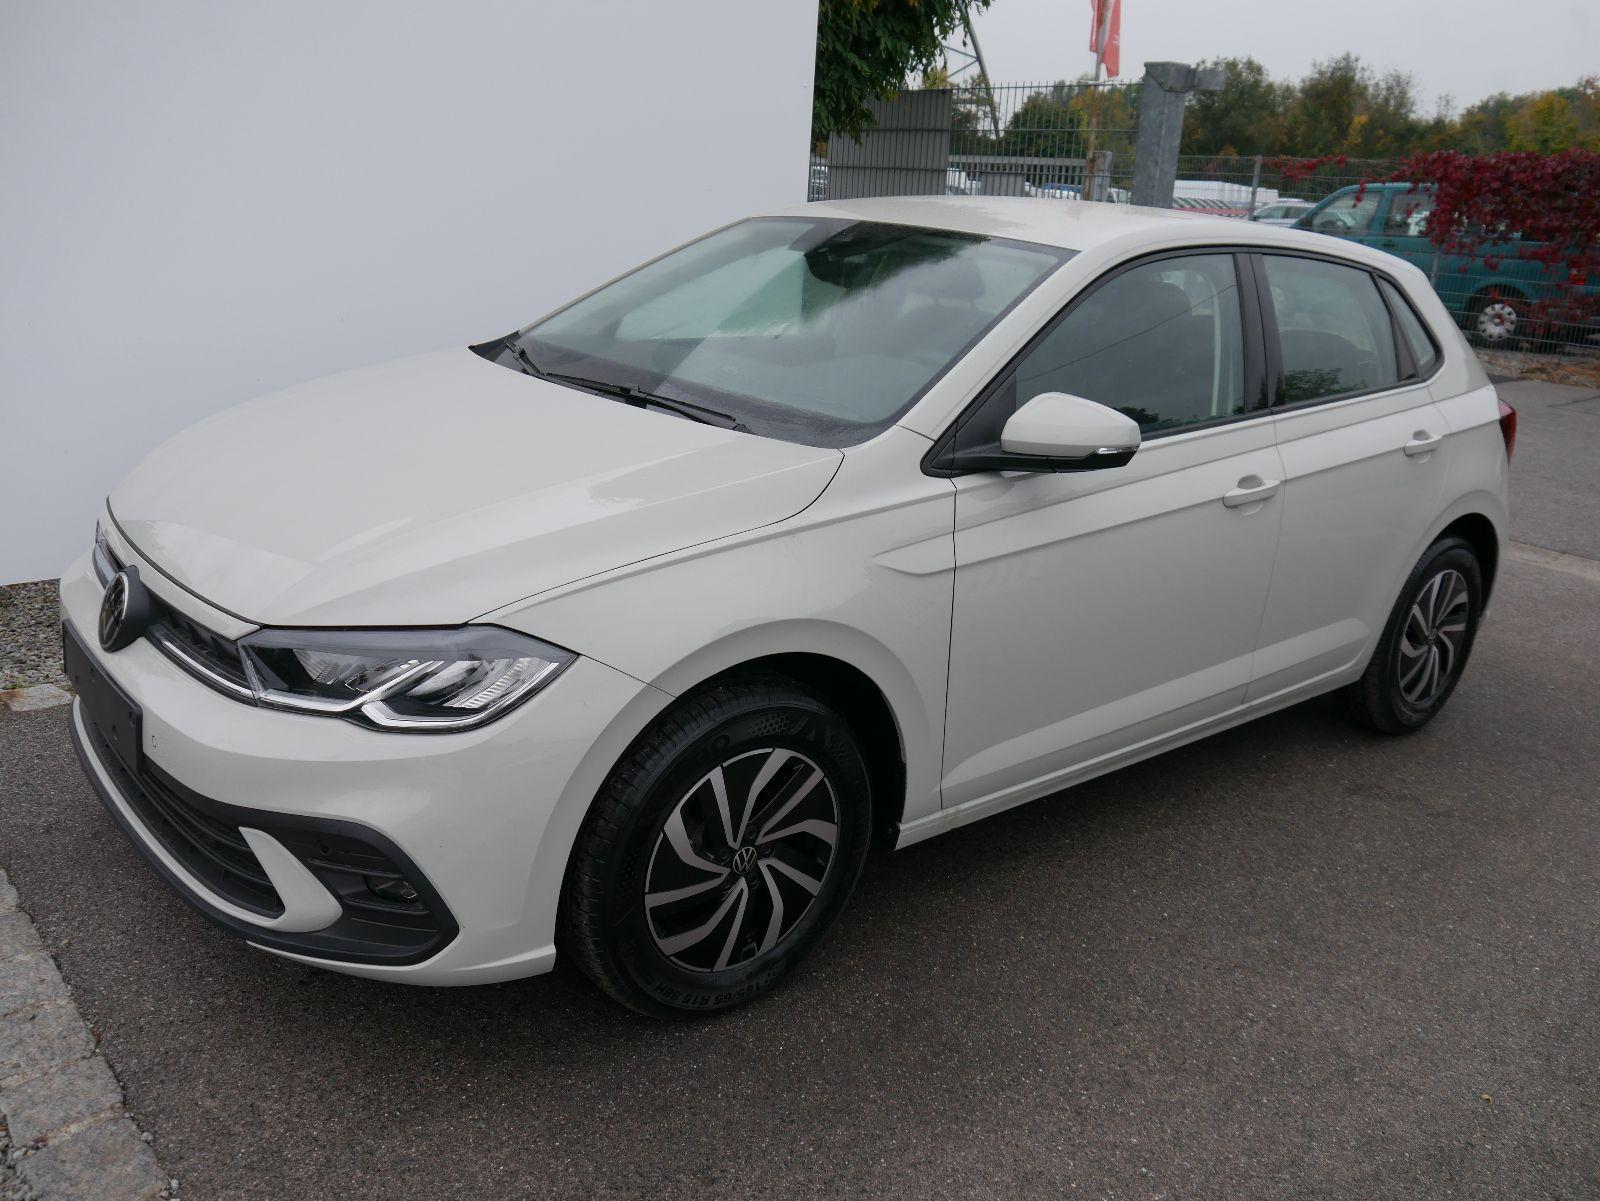 VW Polo Life 1.0 TSI DSG * APP-CONNECT * PDC * SHZ * LED * DAB * FRONT ASSIST *